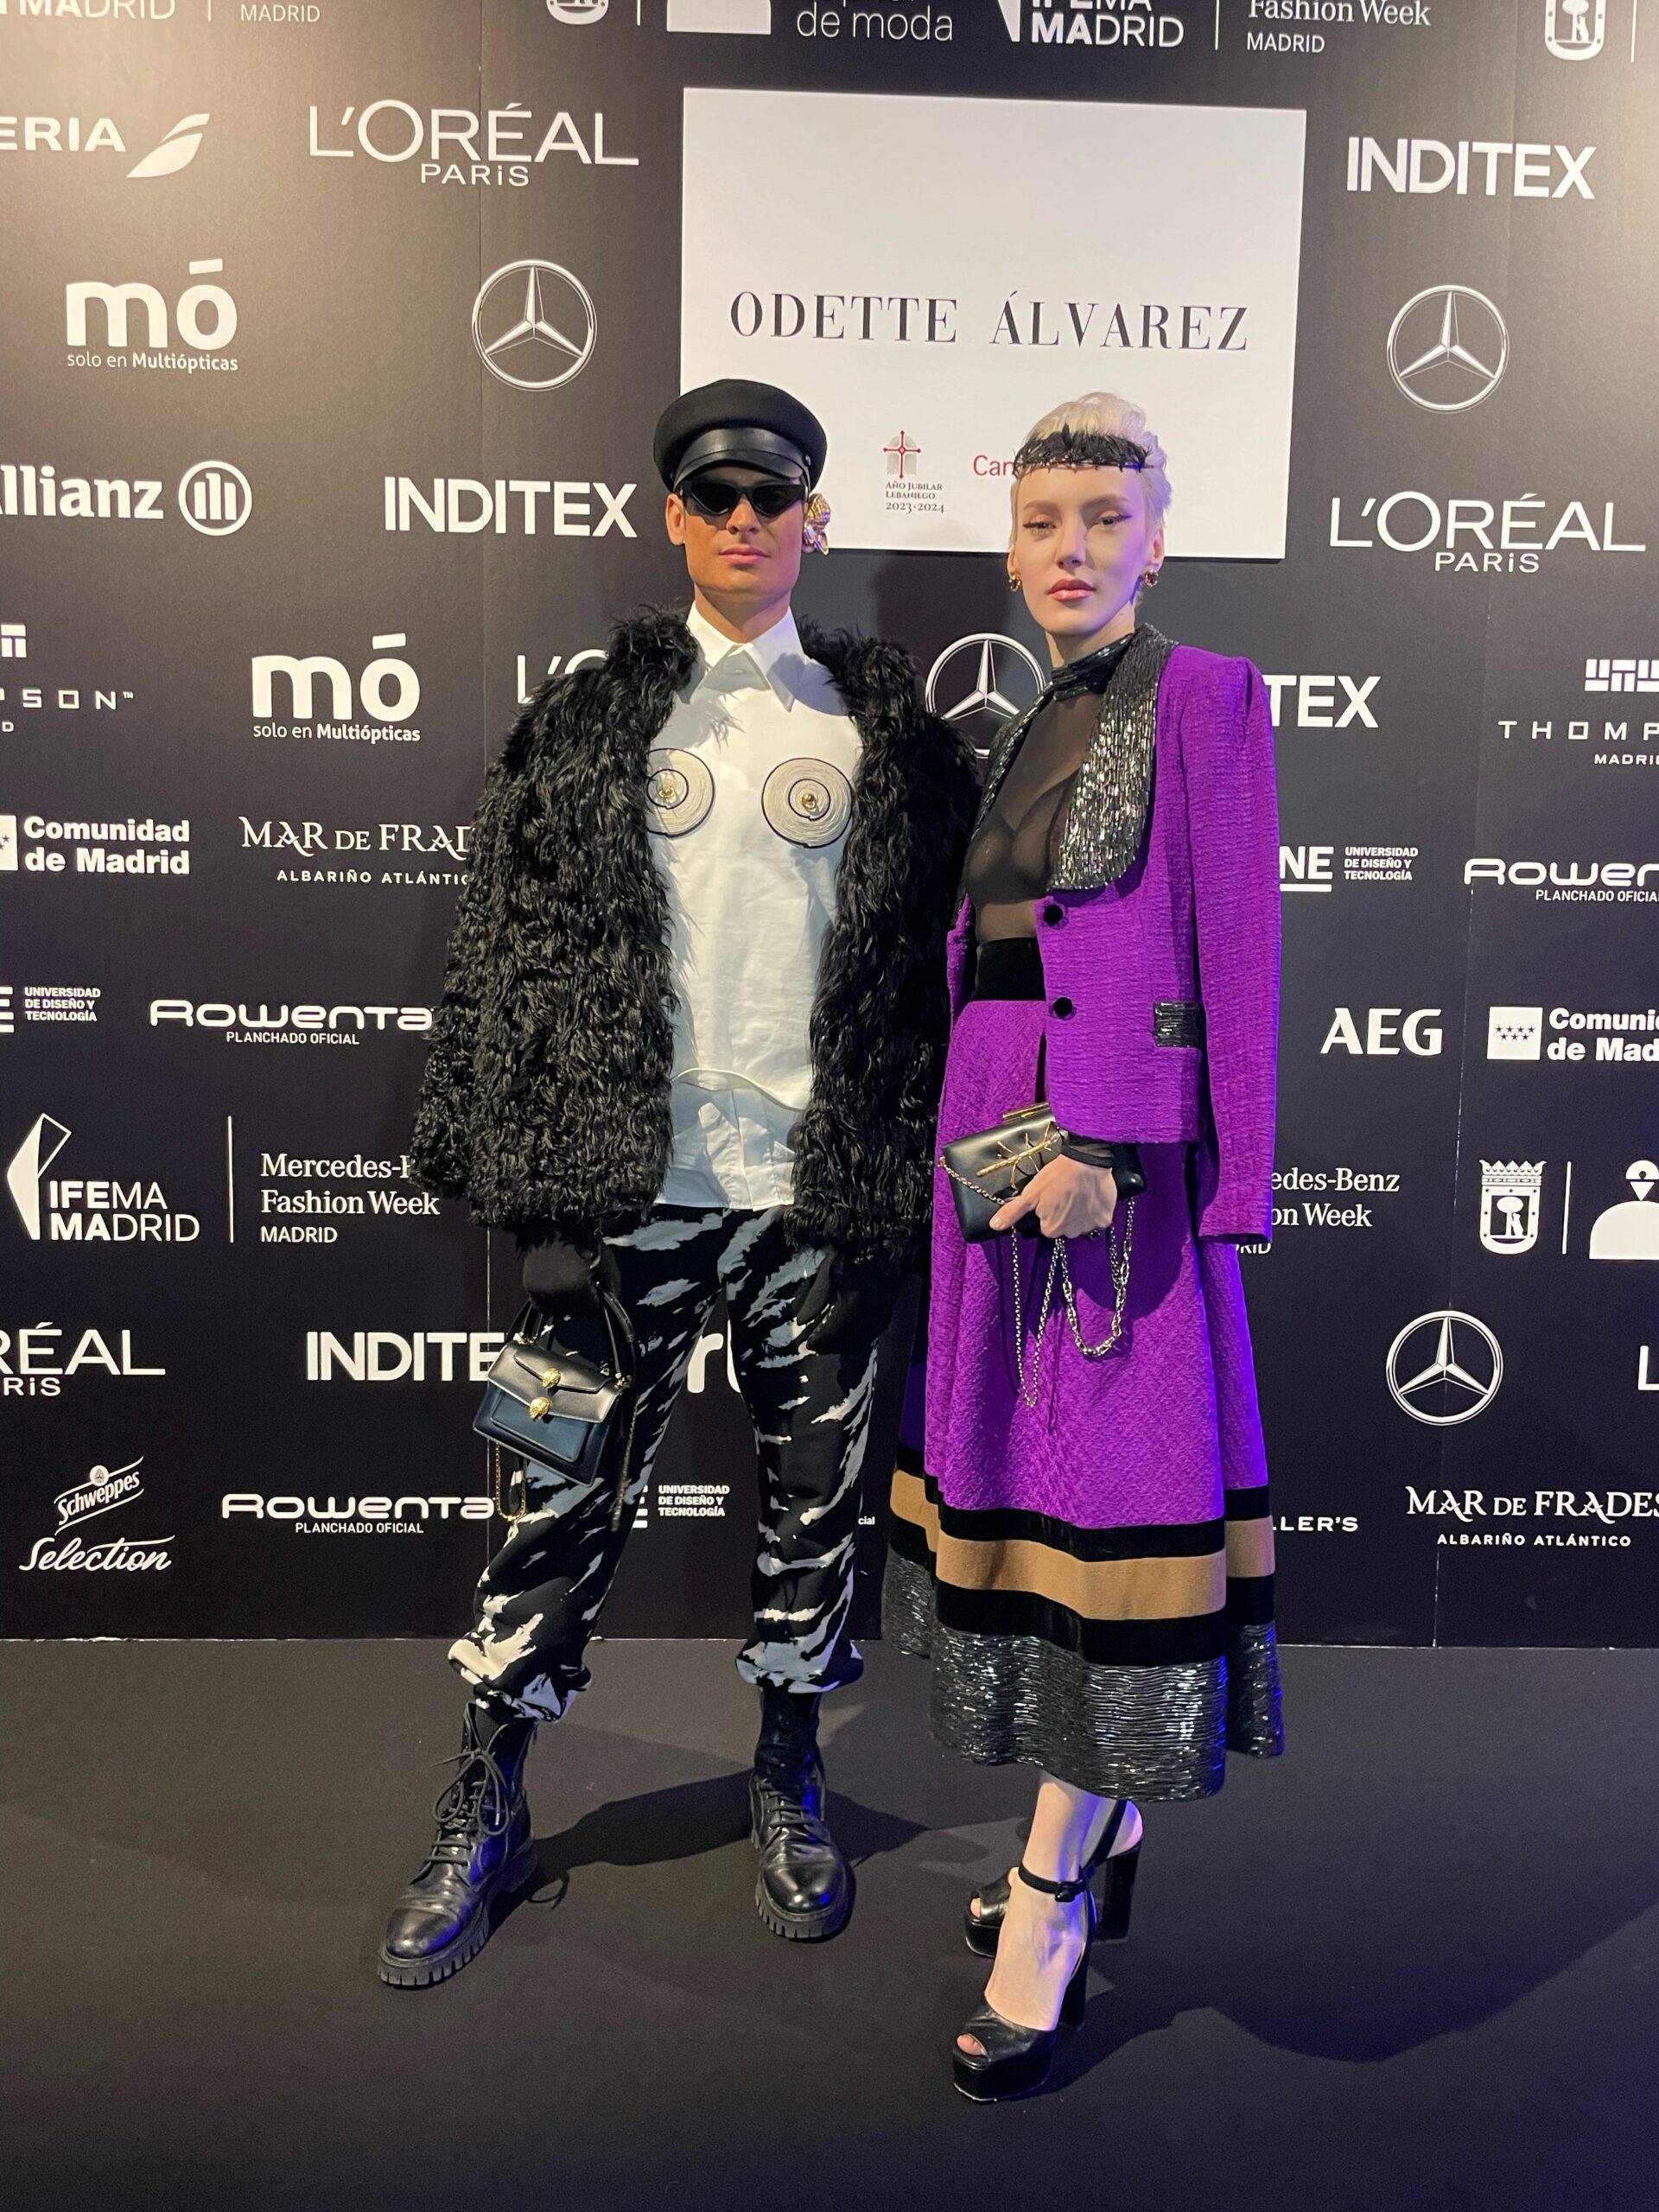 Exclusive: MBFW Madrid in pictures with personal shopper Elena Esteban